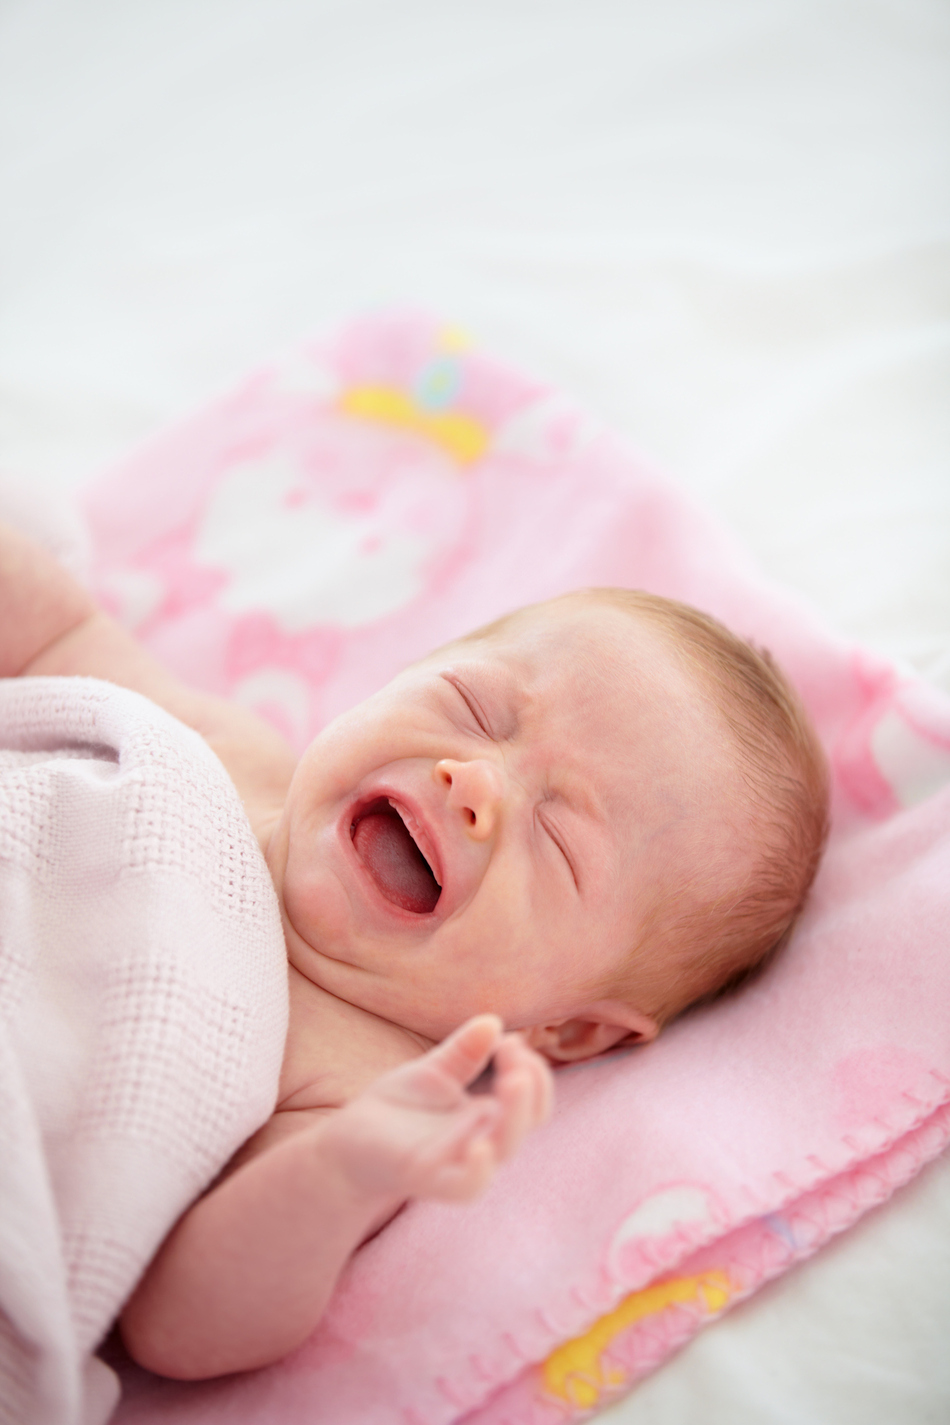 Why Your Baby Cries and How to Manage It